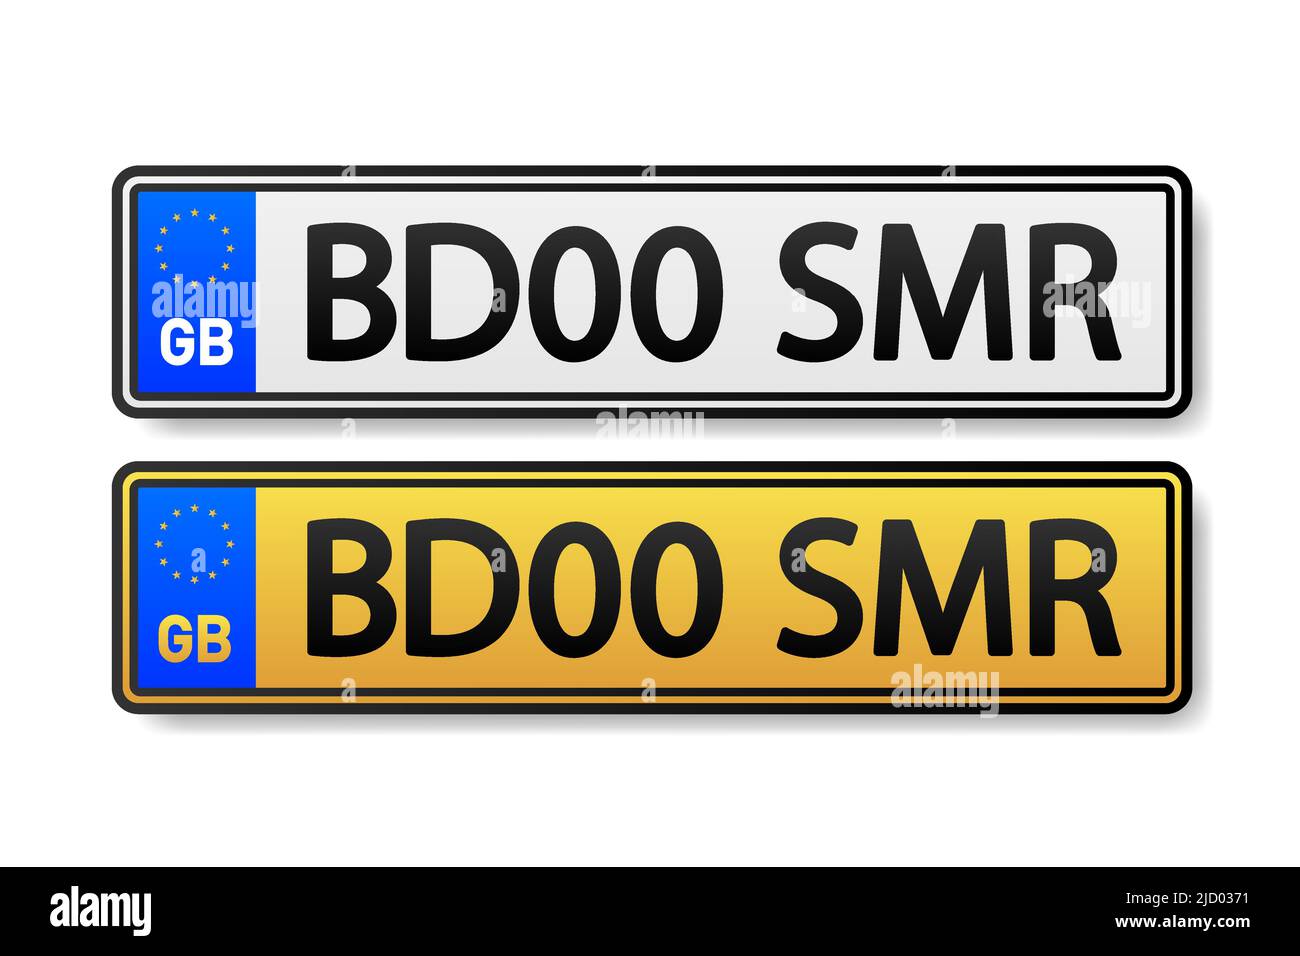 Car number plates Stock Vector Images - Alamy